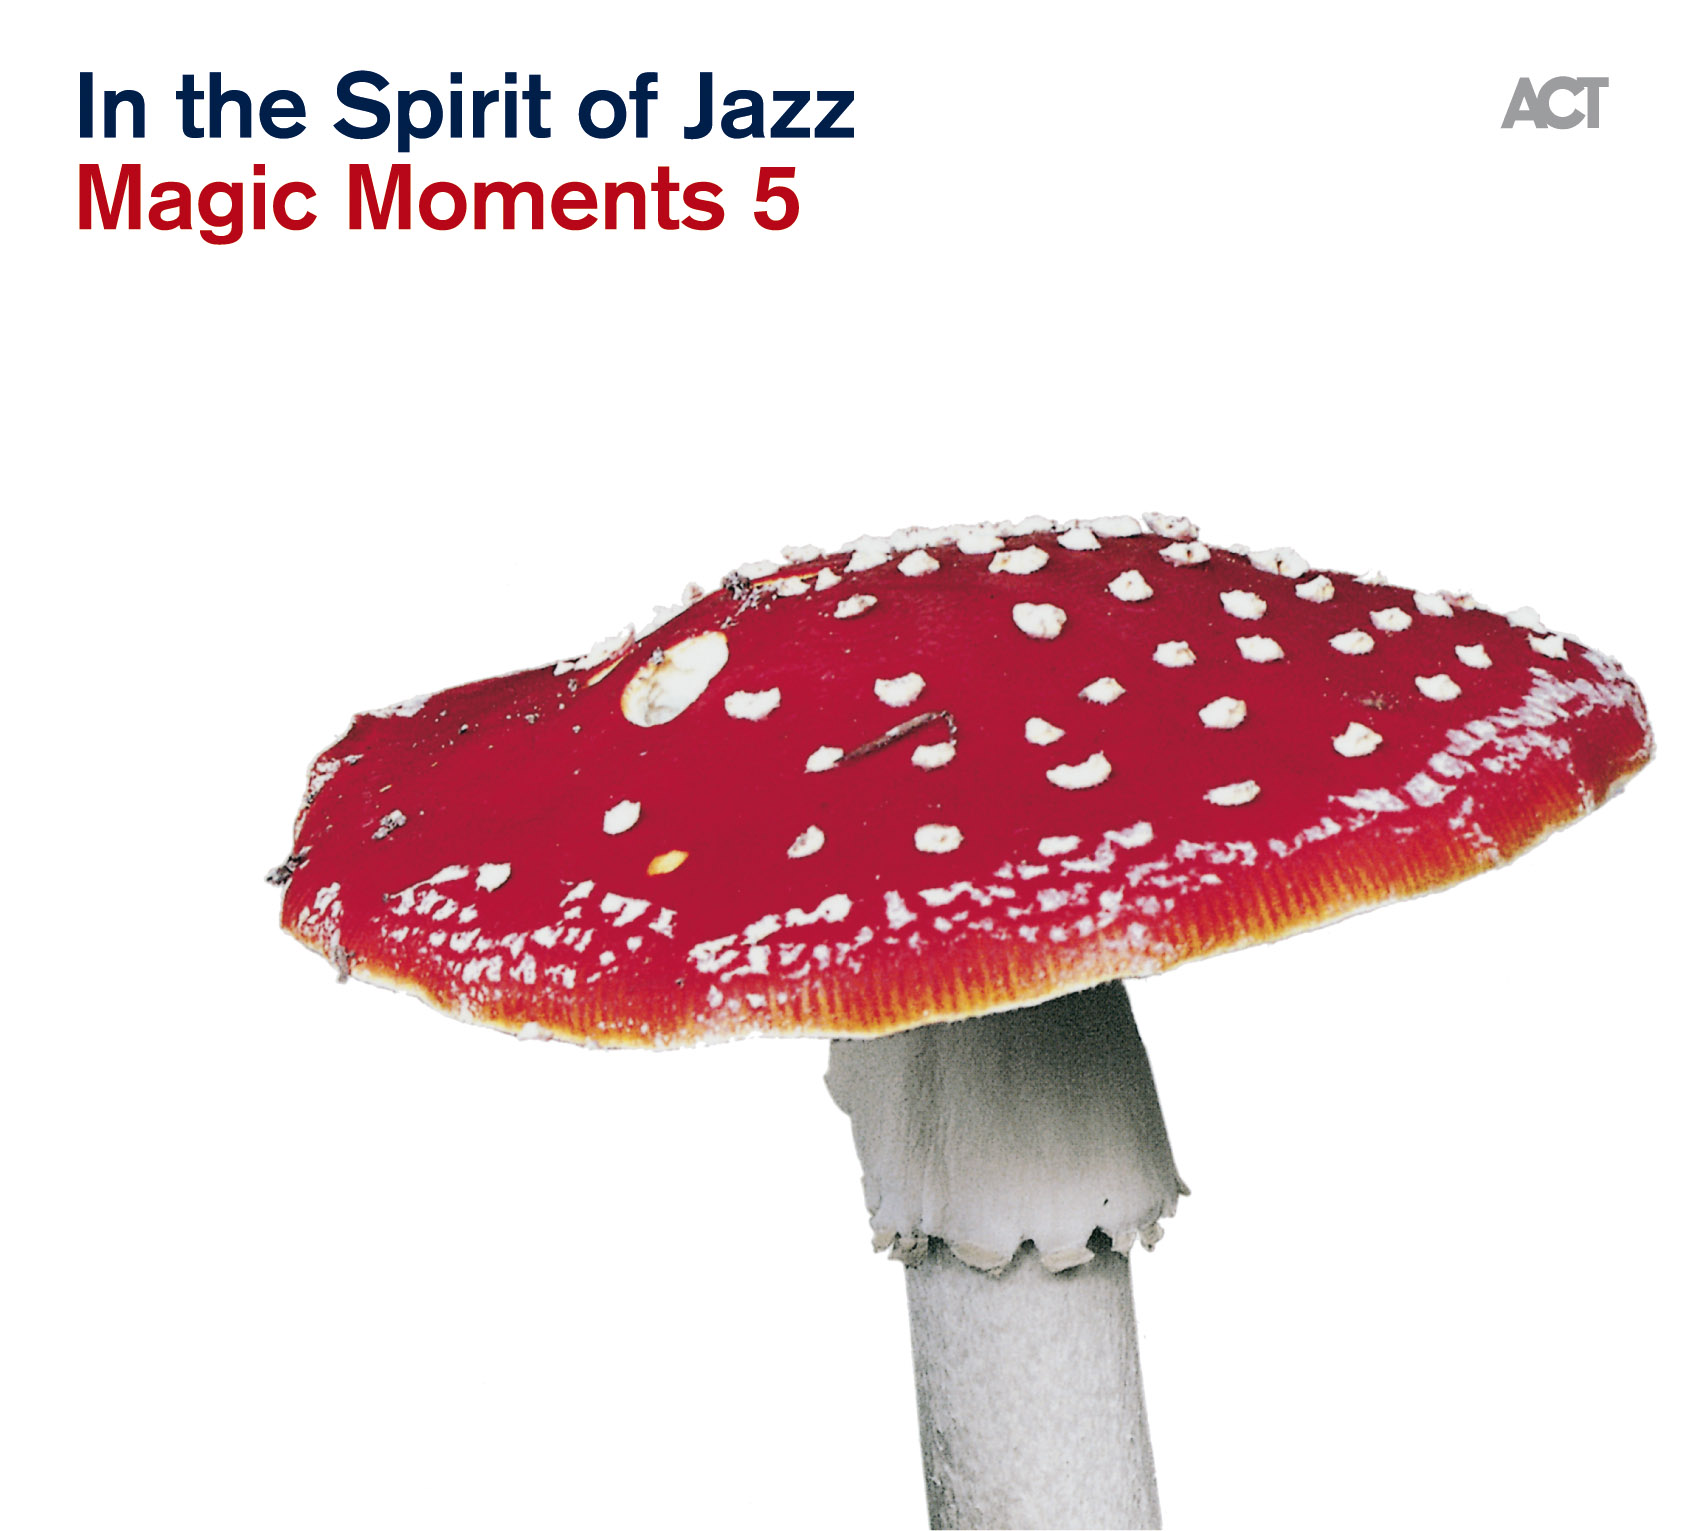 Magic Moments 5 "In The Spirit of Jazz"